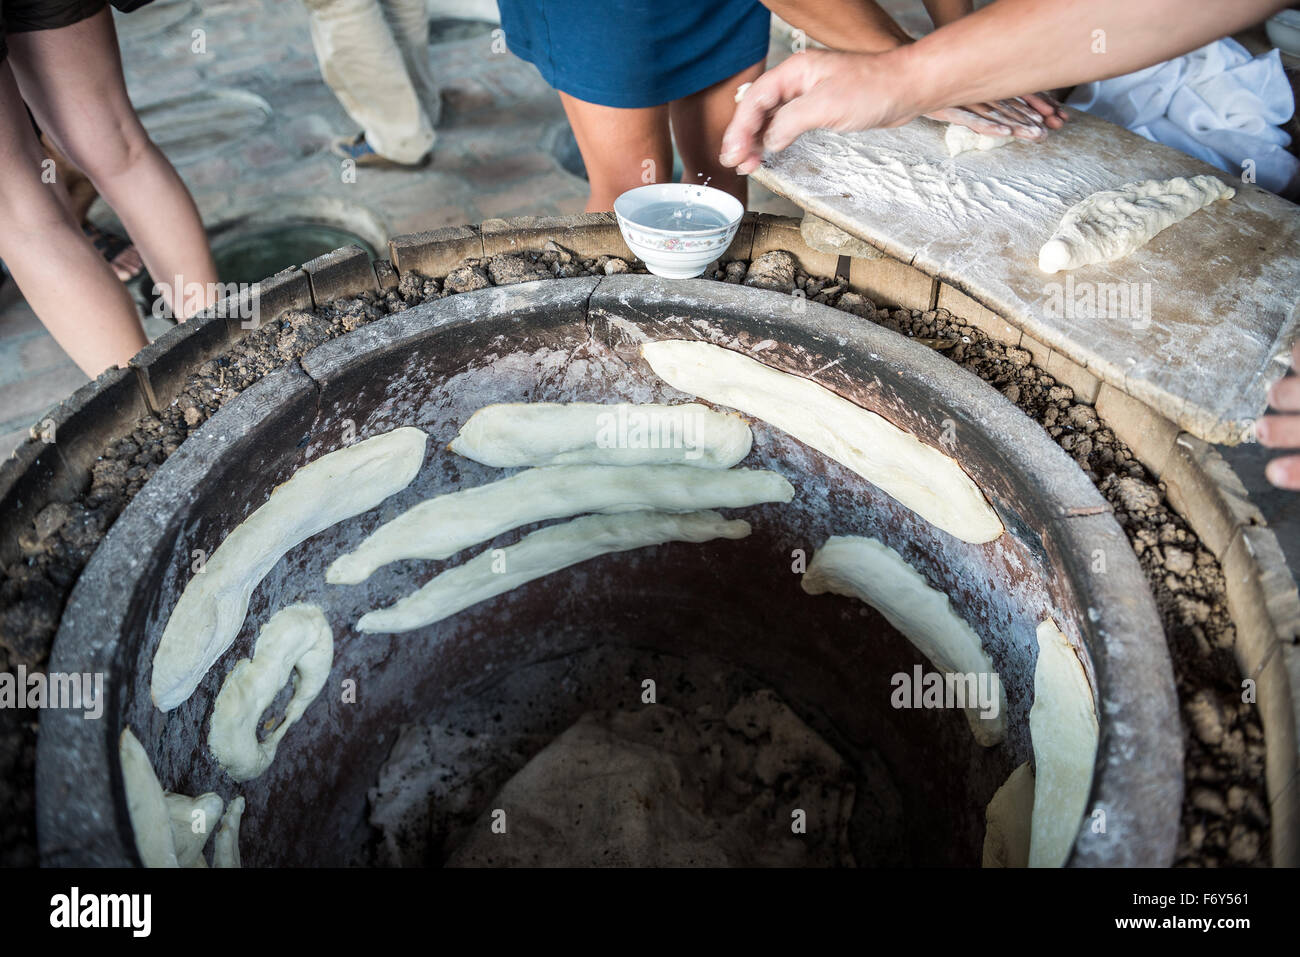 Woman shows traditional way of Shoti Bread baking in oven called tone (torne or turne) in Twins Wine Cellar, Napareuli, Georgia Stock Photo